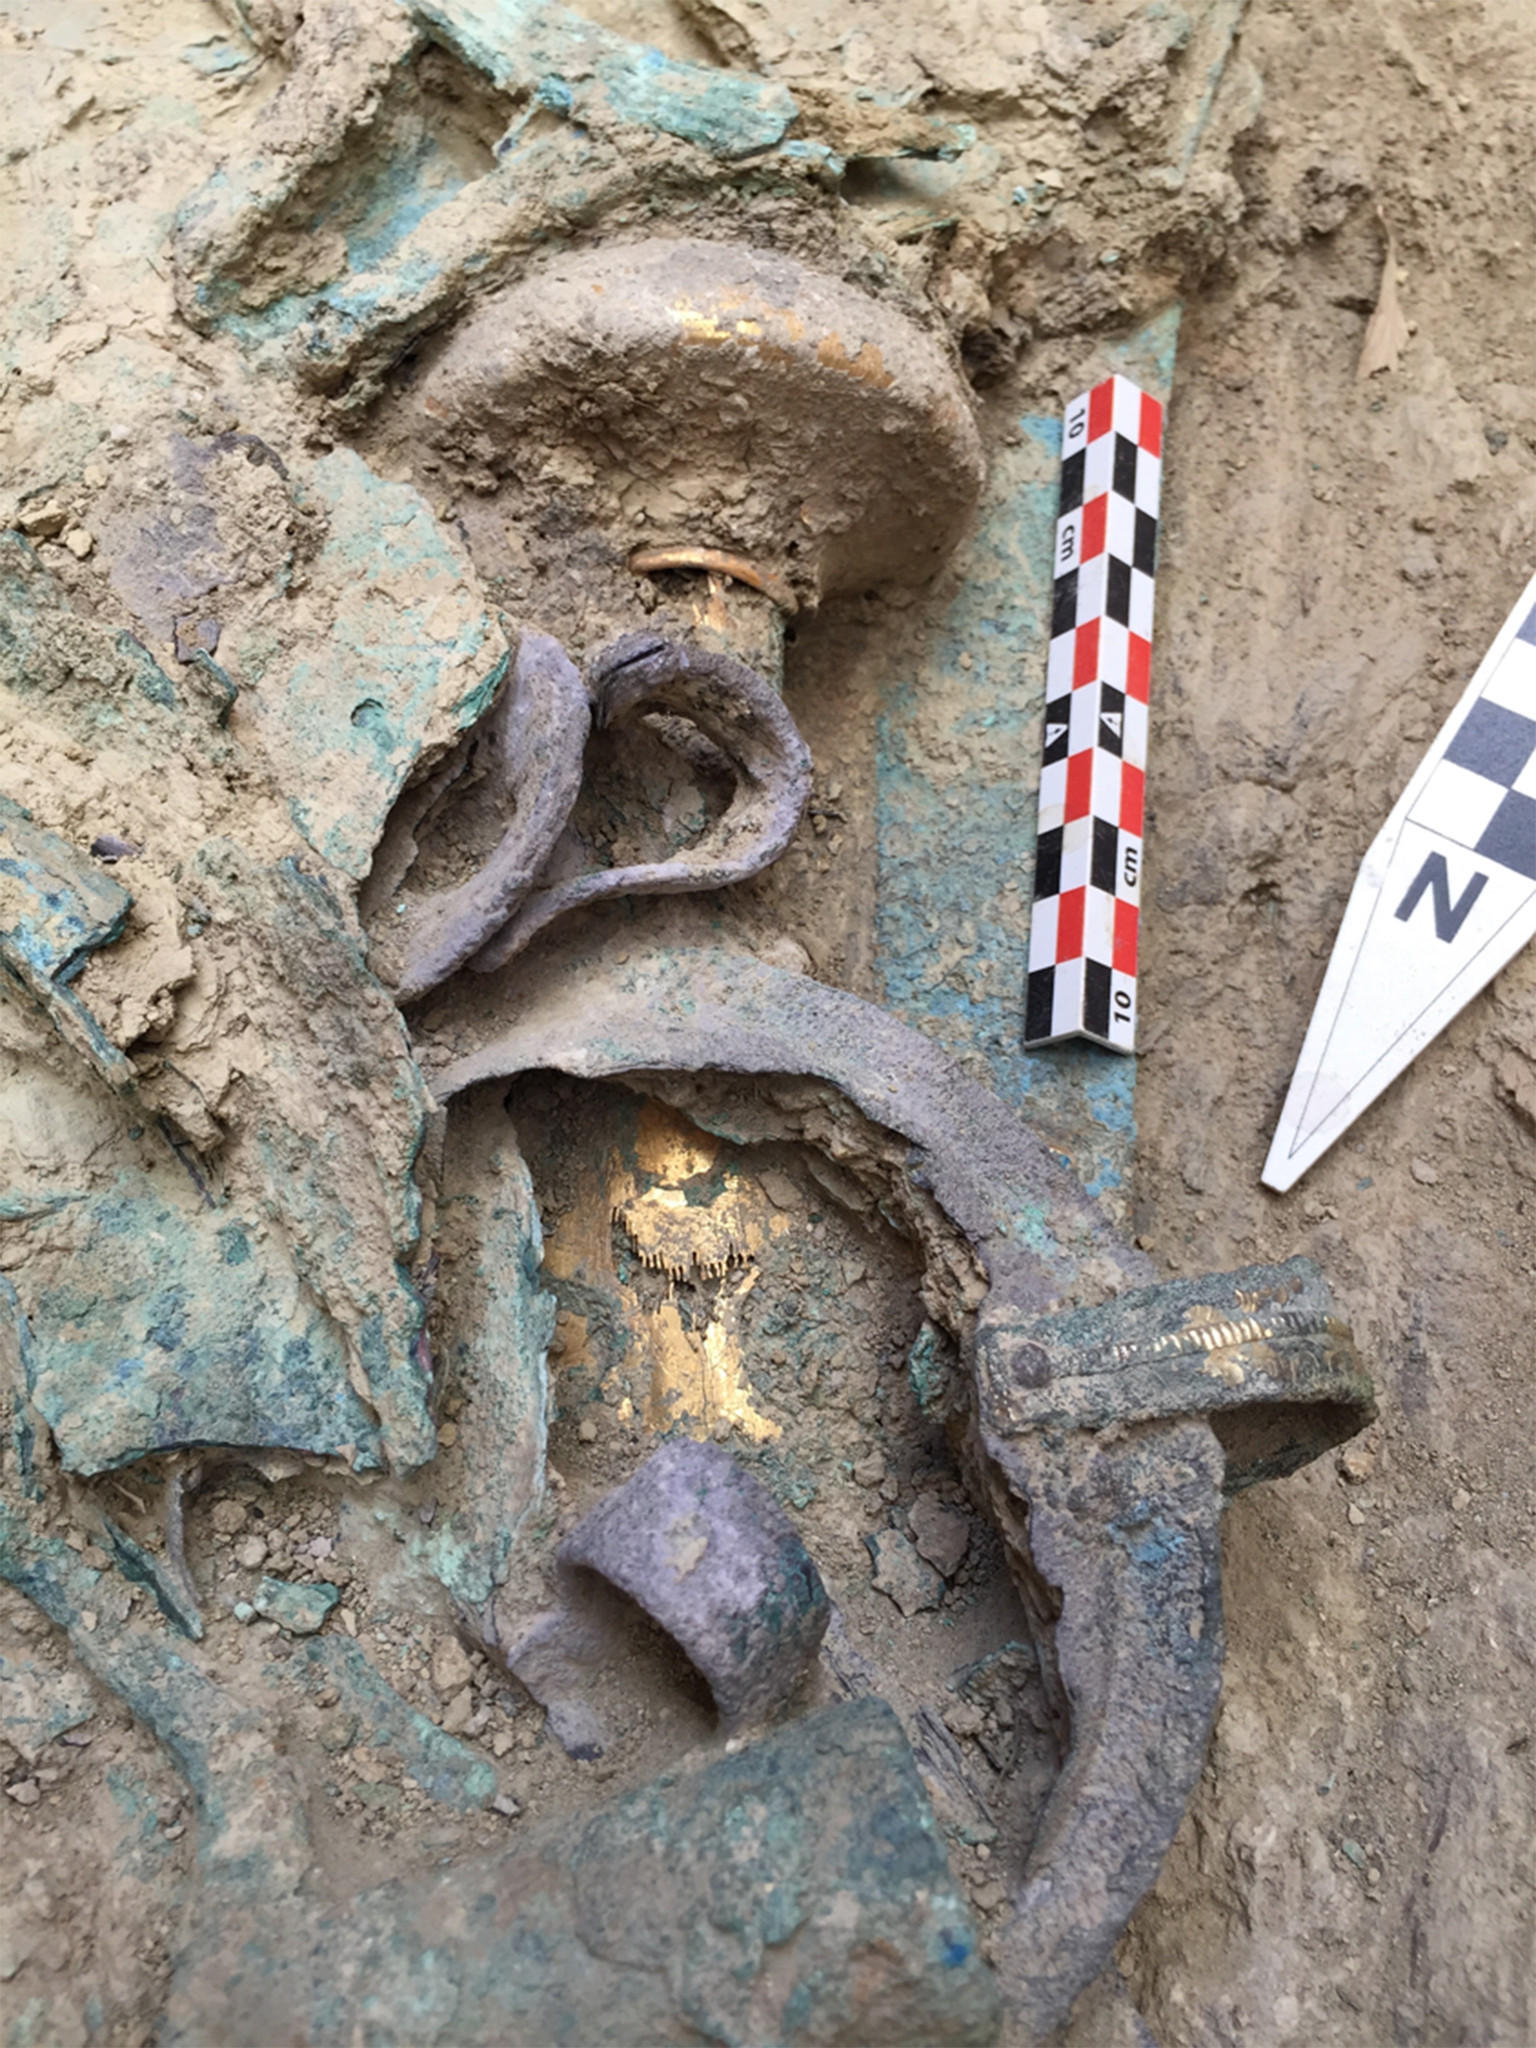 Pylos warrior tomb's tiniest treasure is its greatest – The History Blog